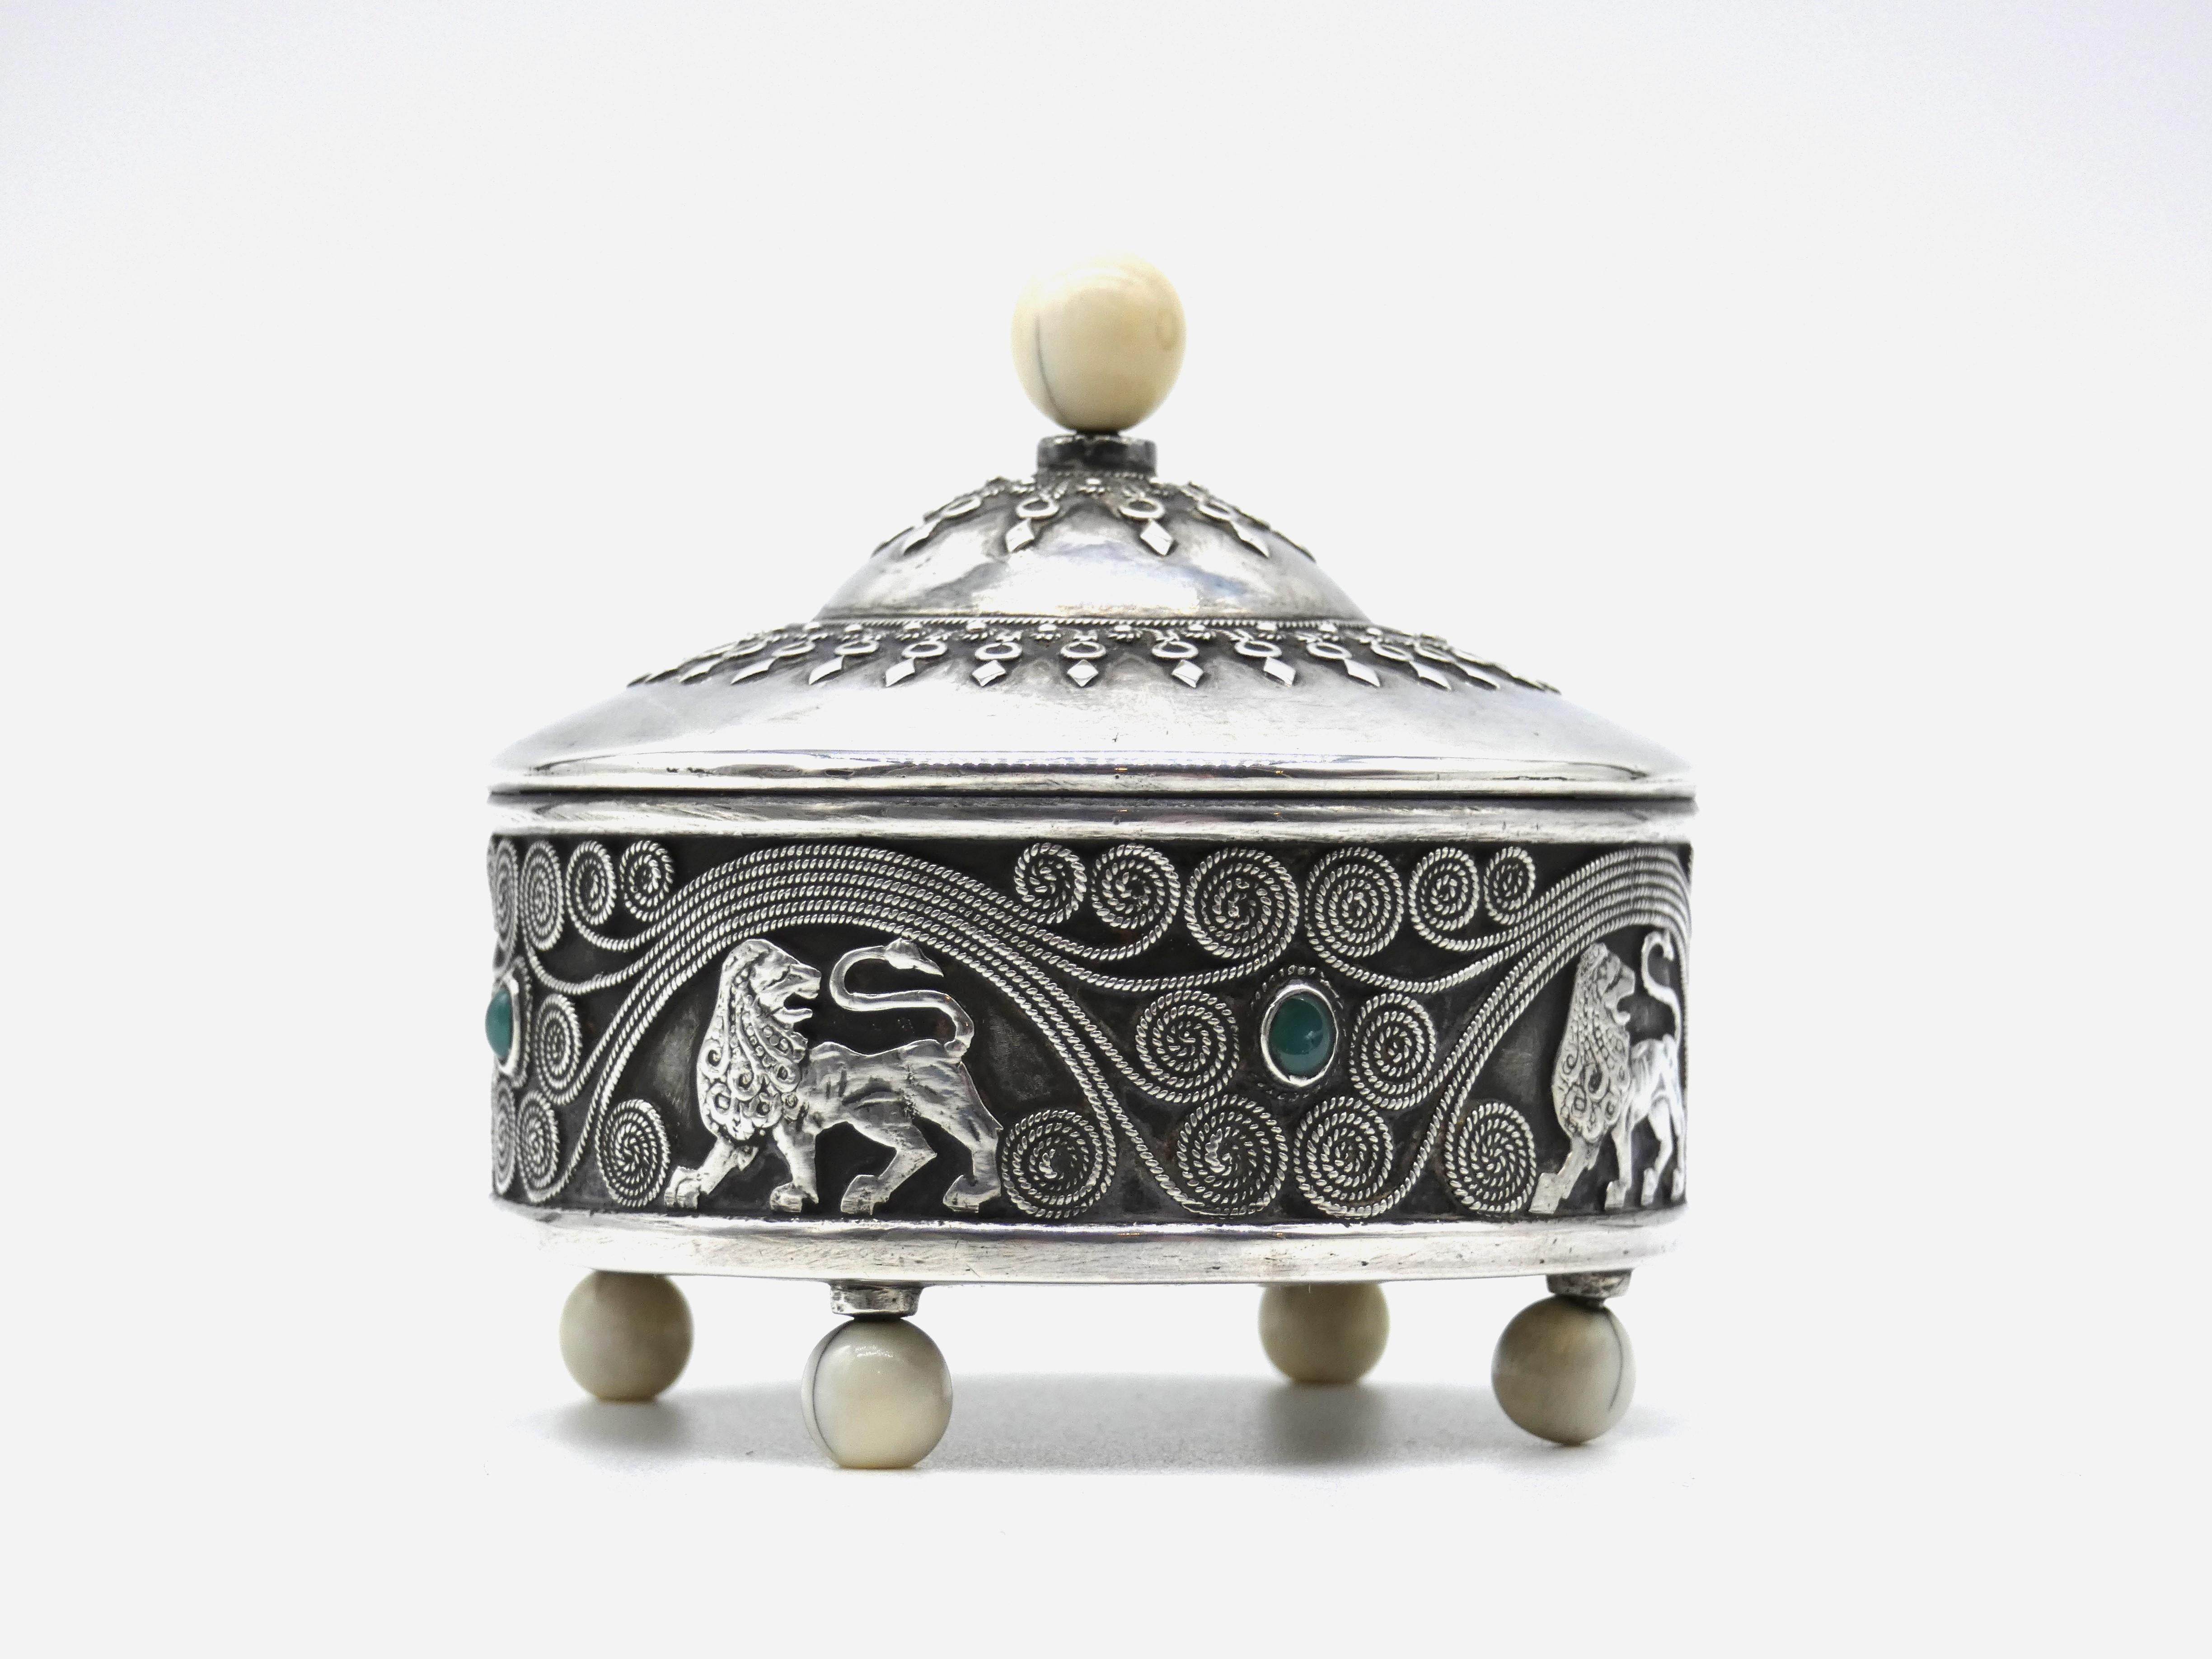 Spice container stands on four ball shaped ivory feet attached to base. Container is decorated with detailed filigree lions, scrolling designs and embellished with four emerald colored gemstones. Removable cover is stylishly chased with diamond